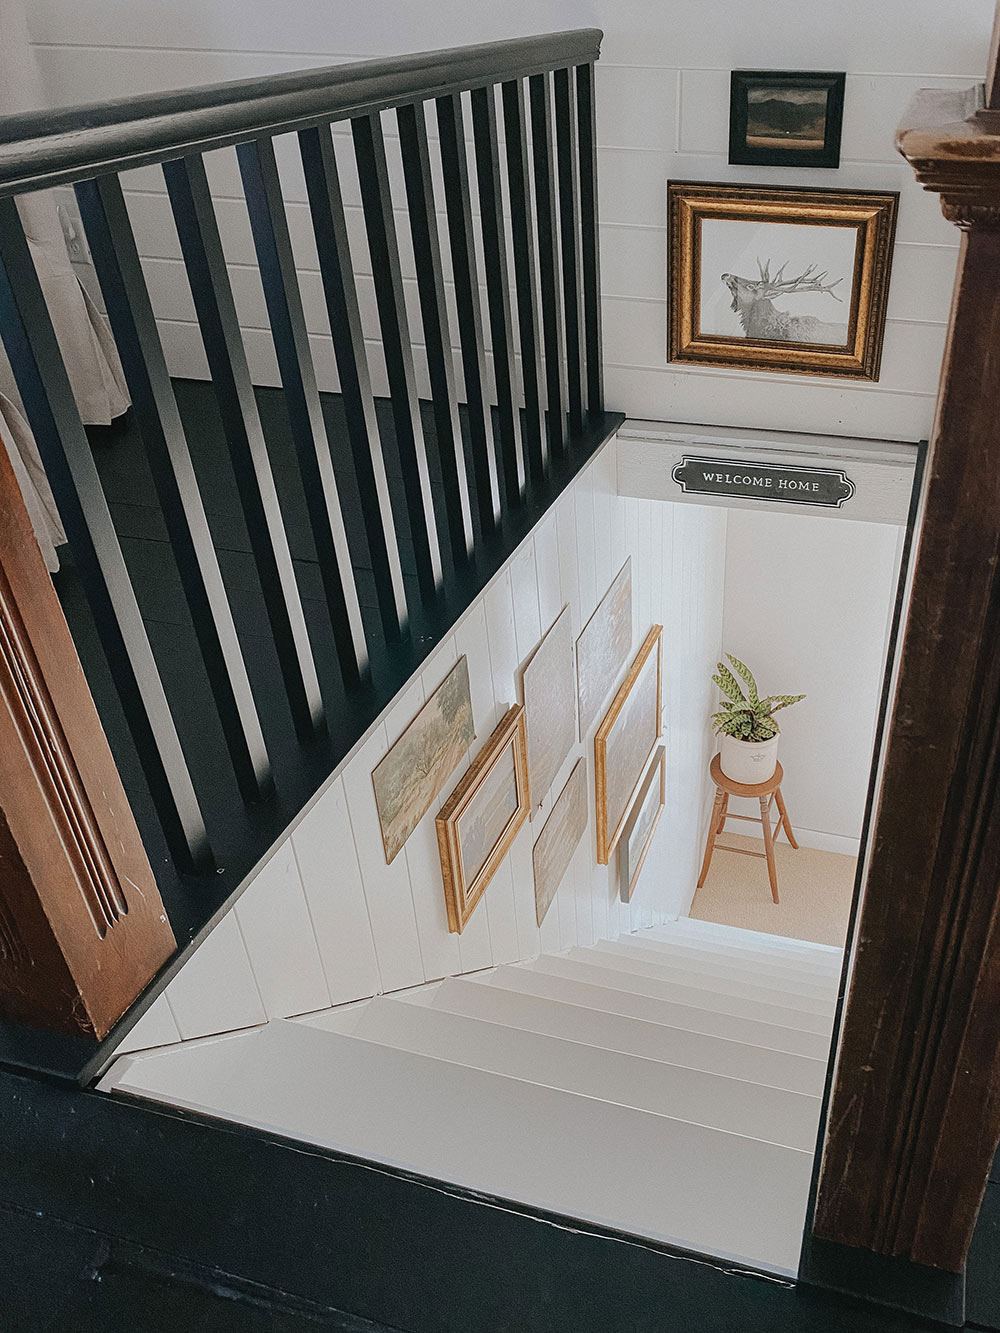 Angled shot of white staircase from the top with a plant on a stool at foot of stairs.